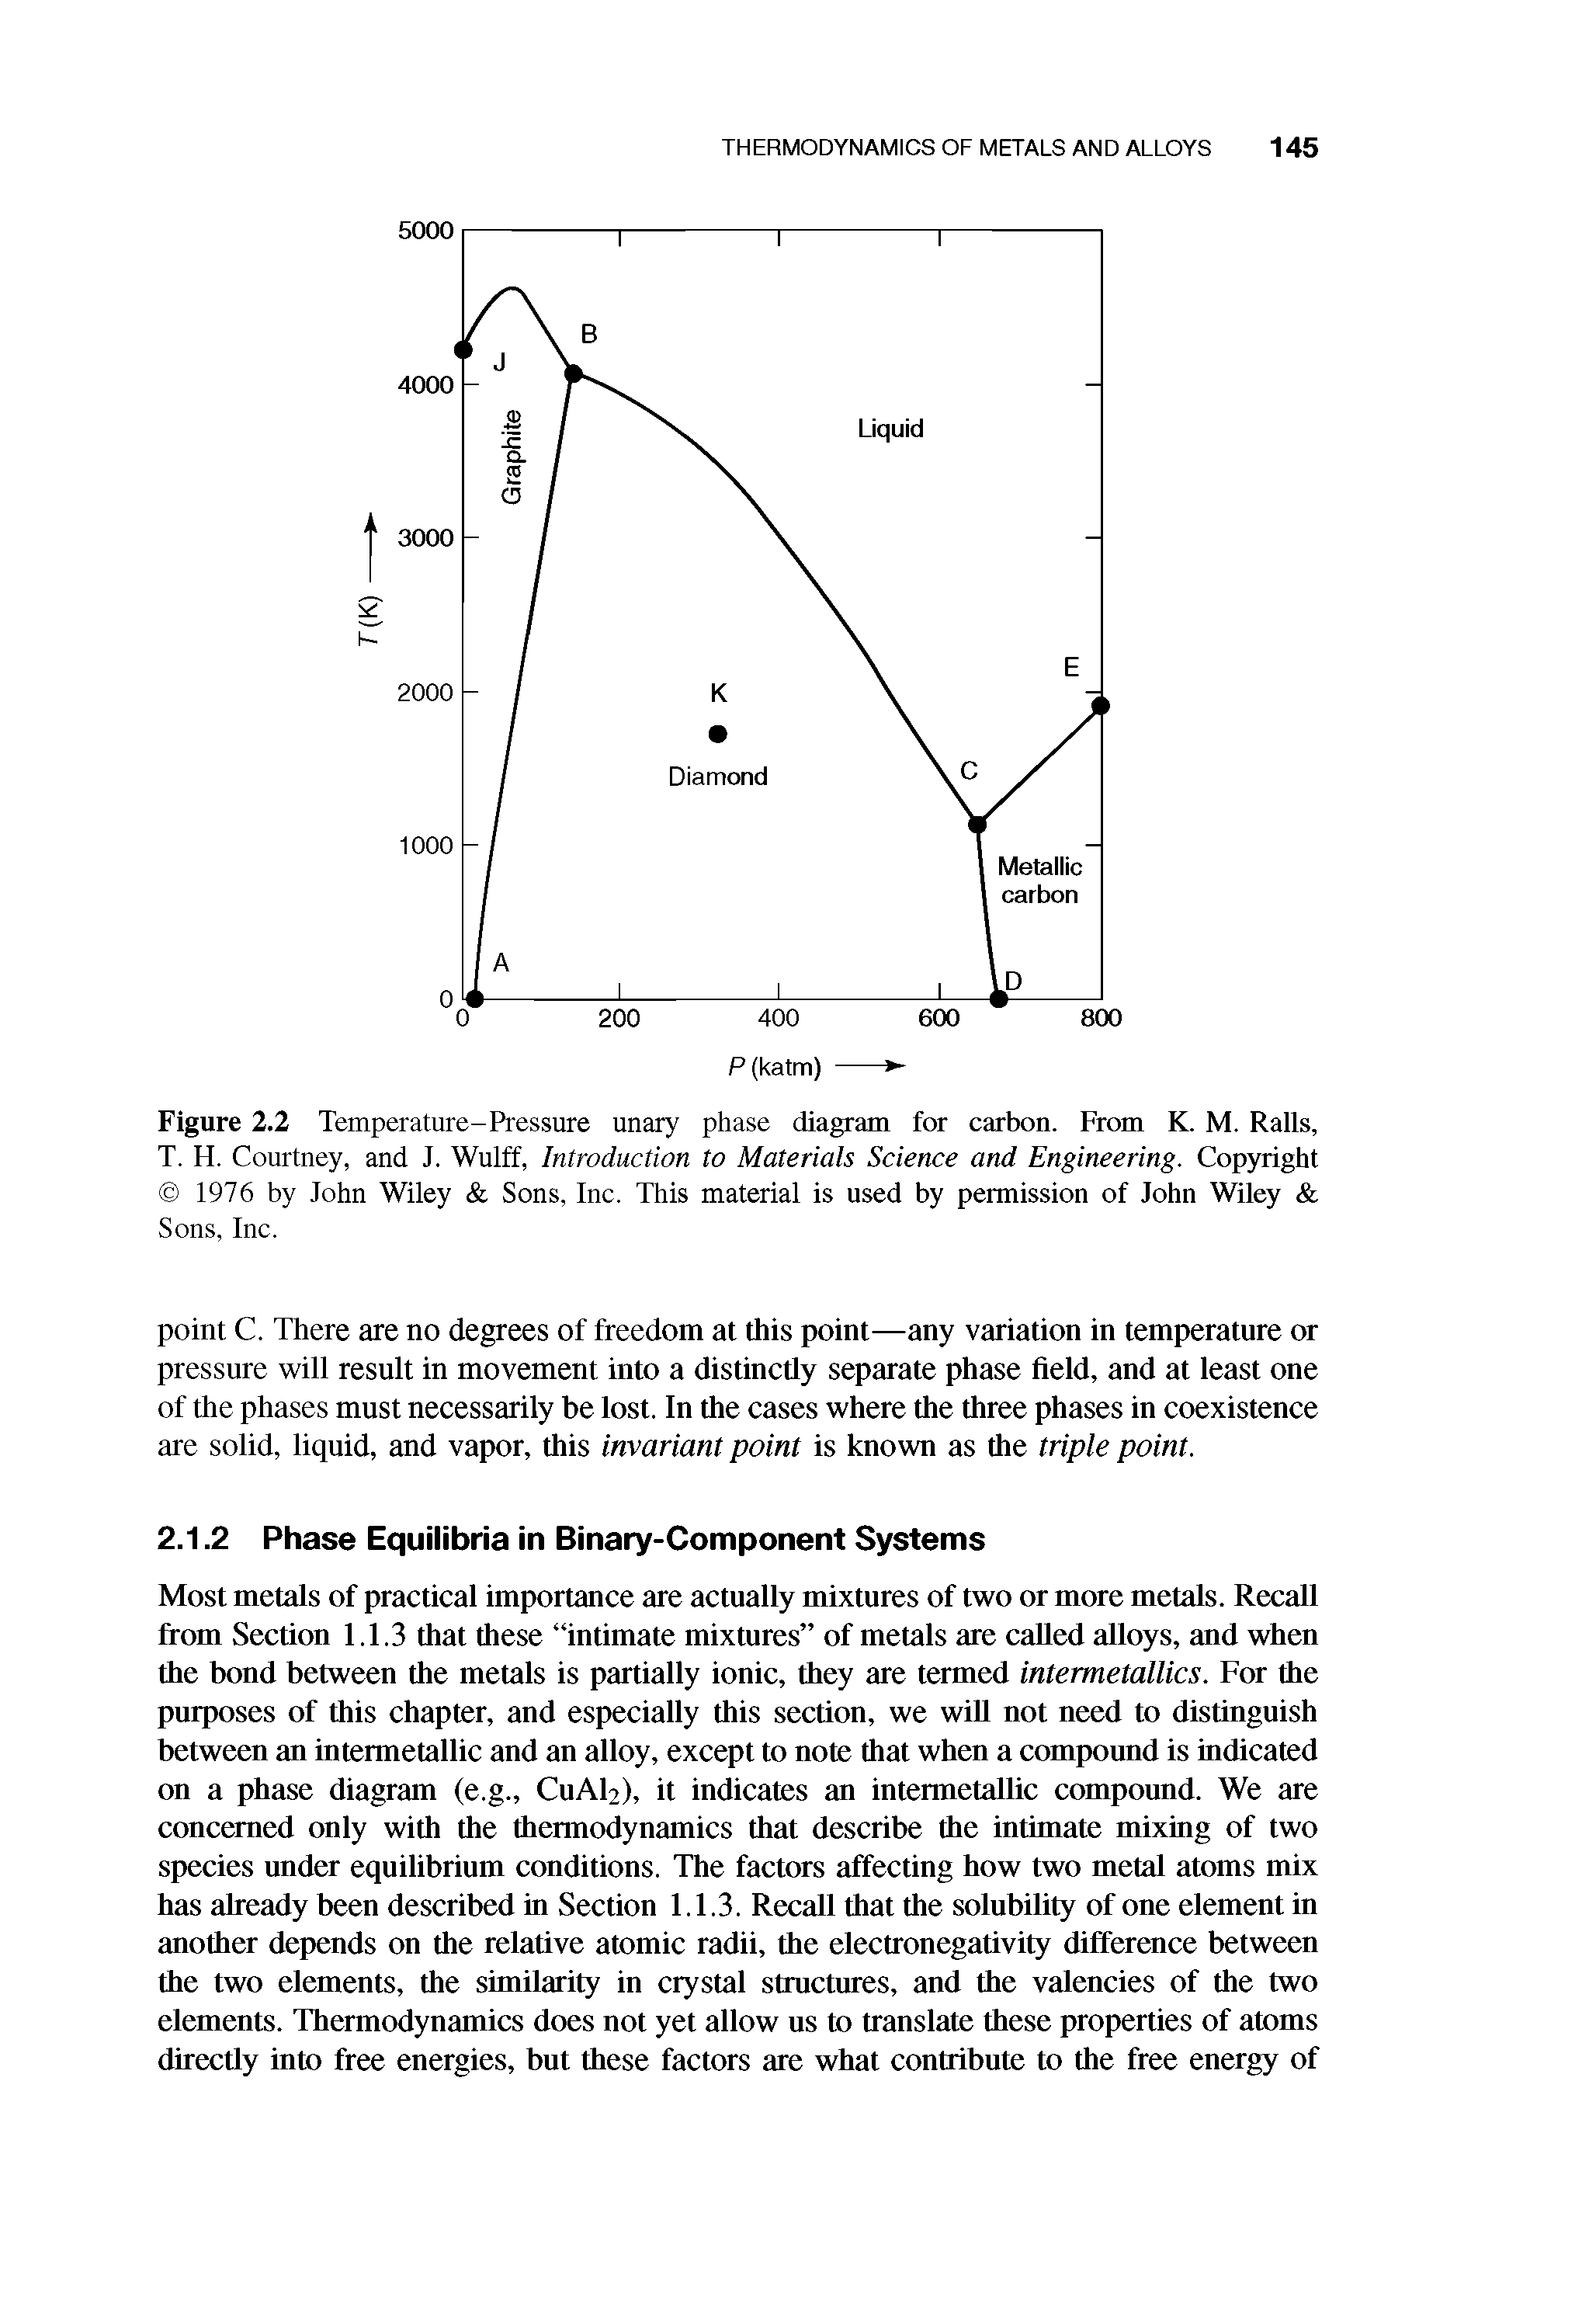 Figure 2.2 Temperature-Pressure unary phase diagram for carbon. From K. M. Ralls, T. H. Courtney, and J. Wulff, Introduction to Materials Science and Engineering. Copyright 1976 by John Wiley Sons, Inc. This material is used by permission of John Wiley Sons, Inc.